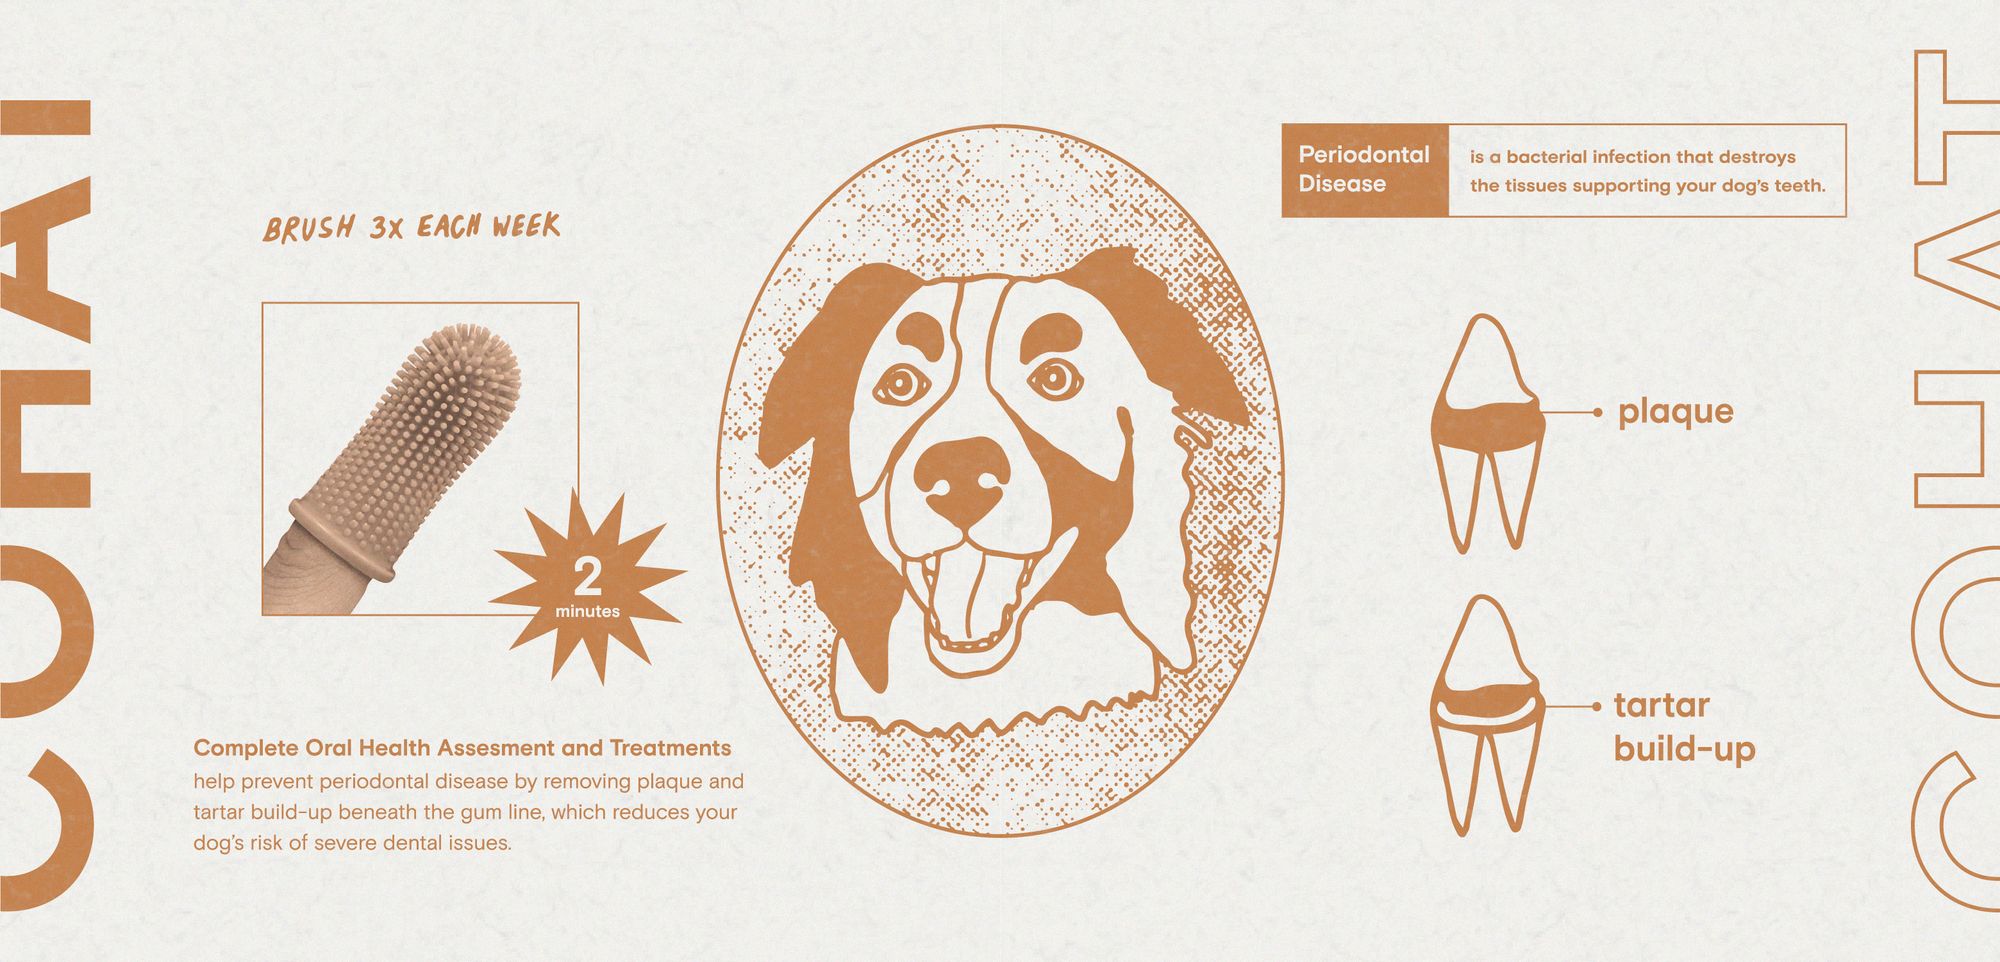 COHAT: Comprehensive Oral Health Assessment (for dogs)